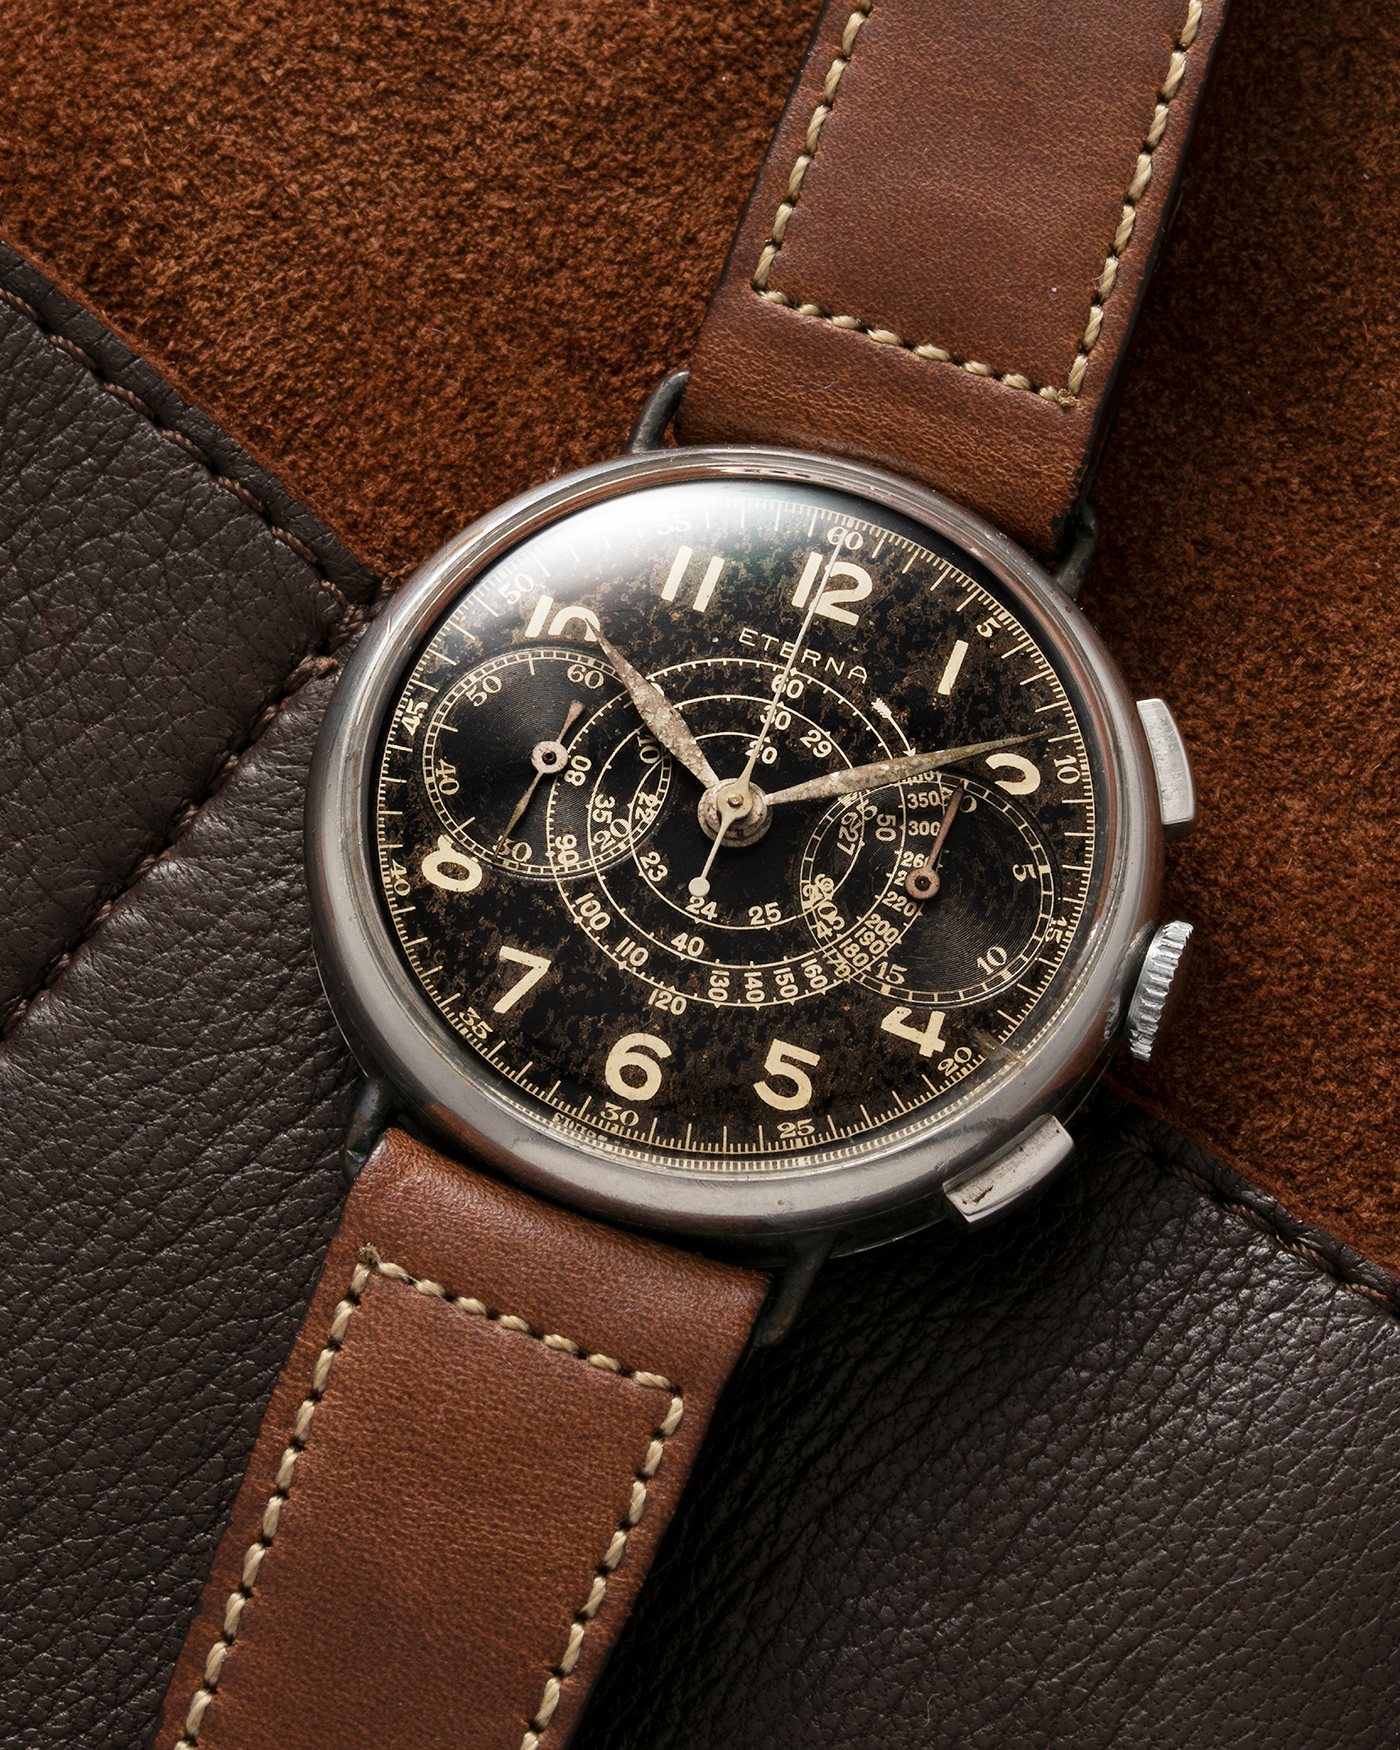 Brand: Eterna Year: 1940’s Serial Number: 2469370 Material: Stainless Steel (Staybrite) Movement: Cal. 703 (Based on Valjoux Cal. 22), Manual-Winding Case Diameter: 38mm Lug Width: 18mm Strap: Curious Curio Brown Open End Calf Leather Strap